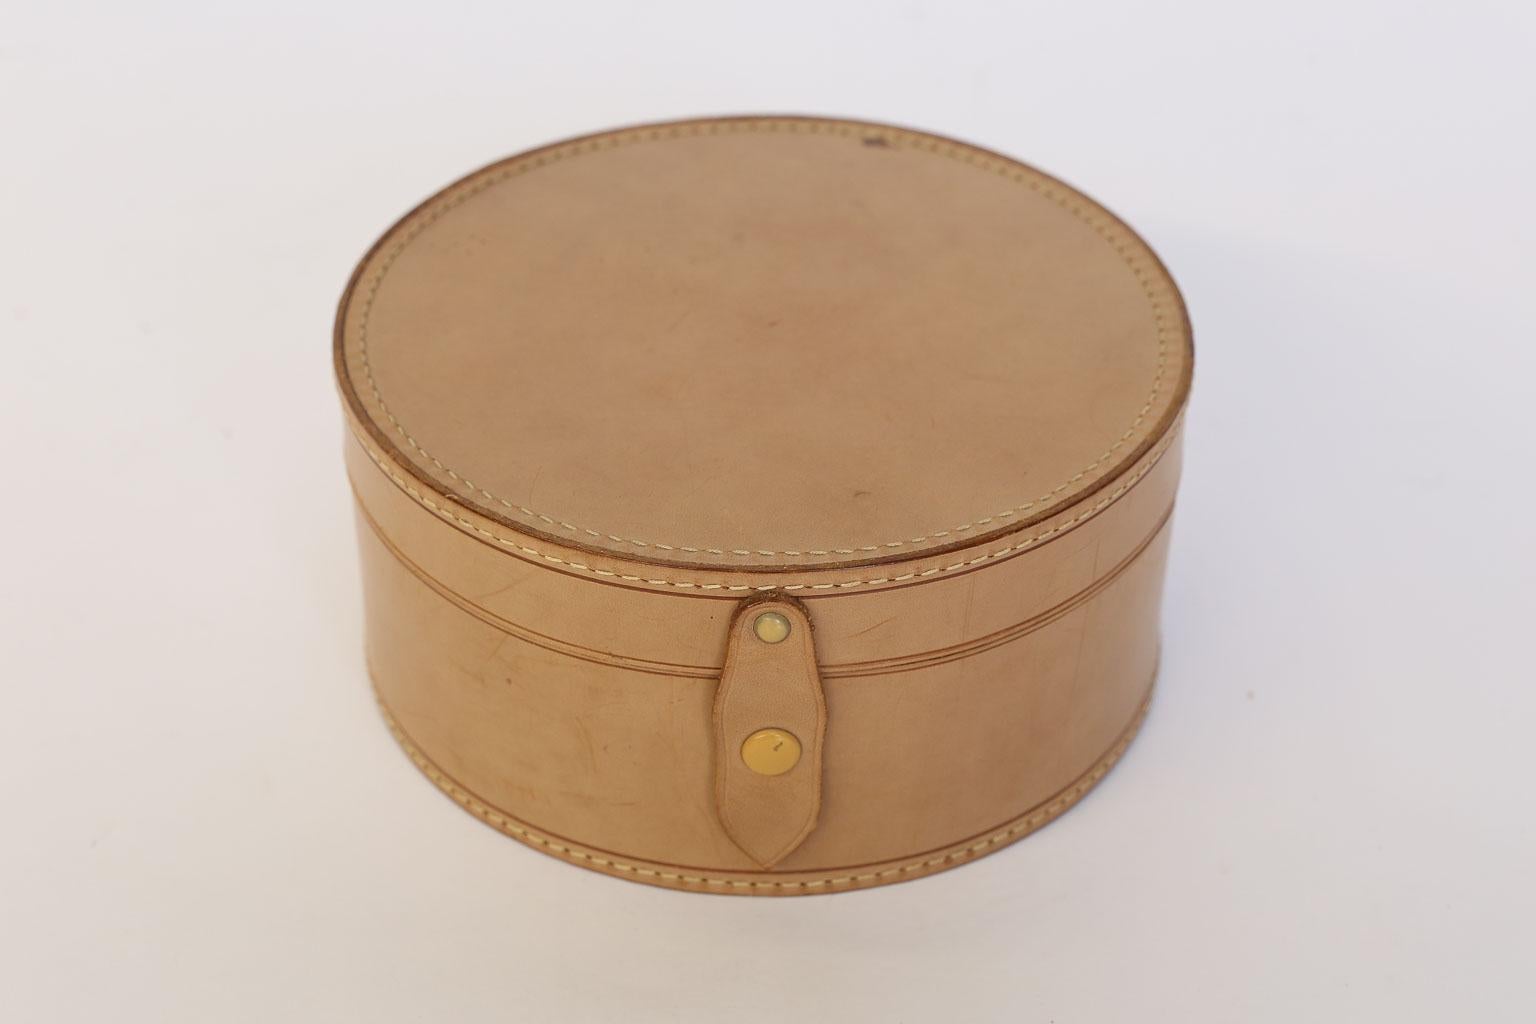 This is a beautiful leather gentleman's collar box. The lovely round shape of the box makes it a unique accessory for your dresser or bookshelf. The leather exterior and linen interior are in near perfect condition. The snap on the leather tab is